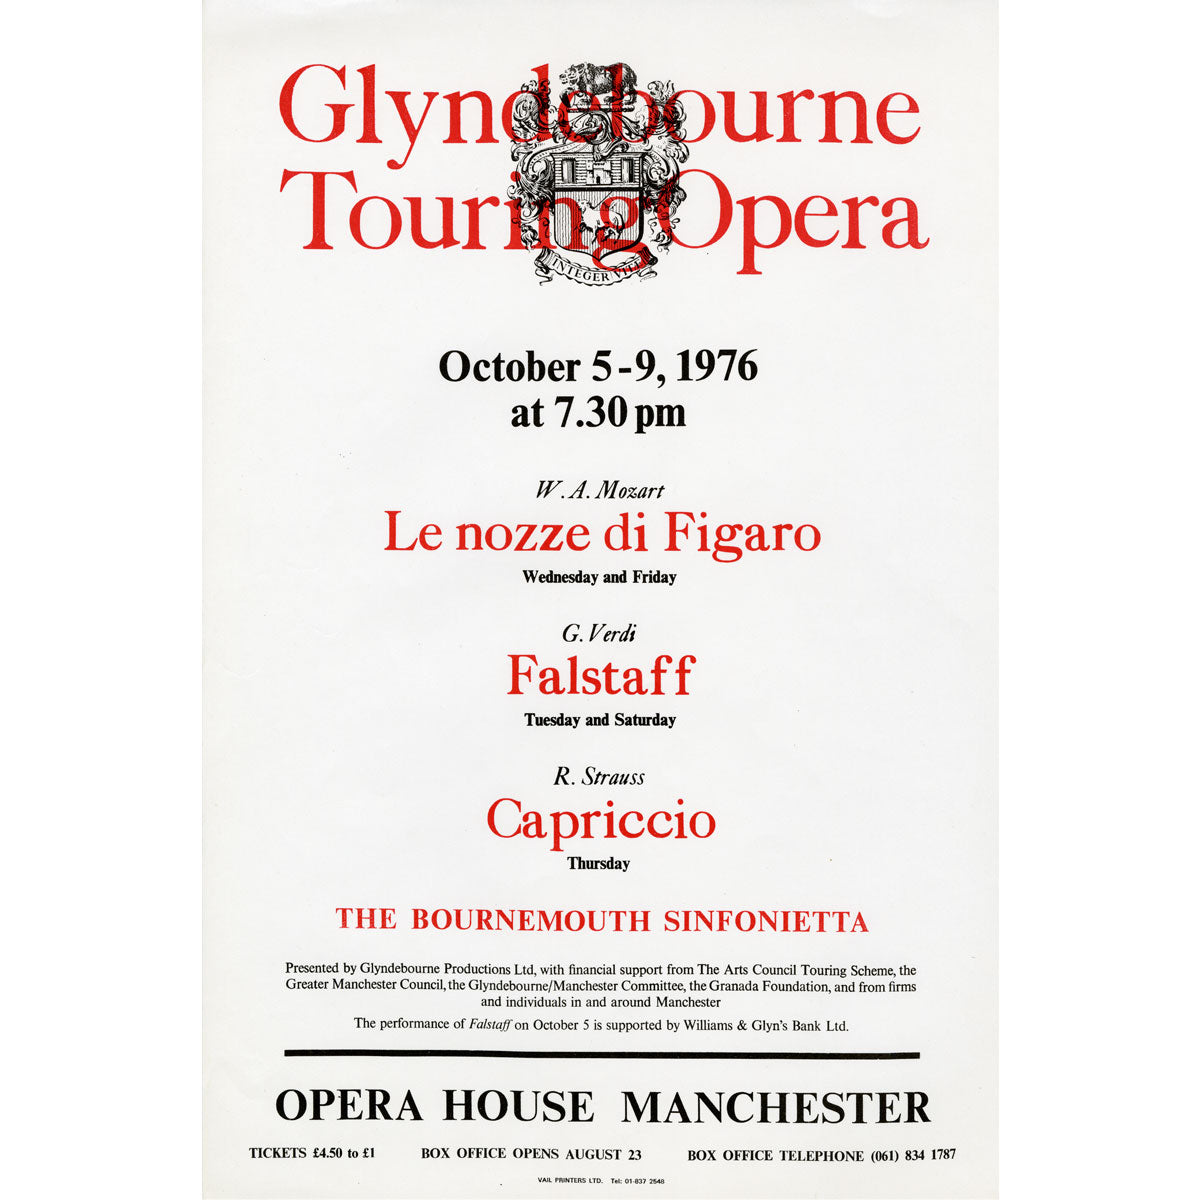 Glyndebourne Touring Opera from Opera House Manchester Poster 1976